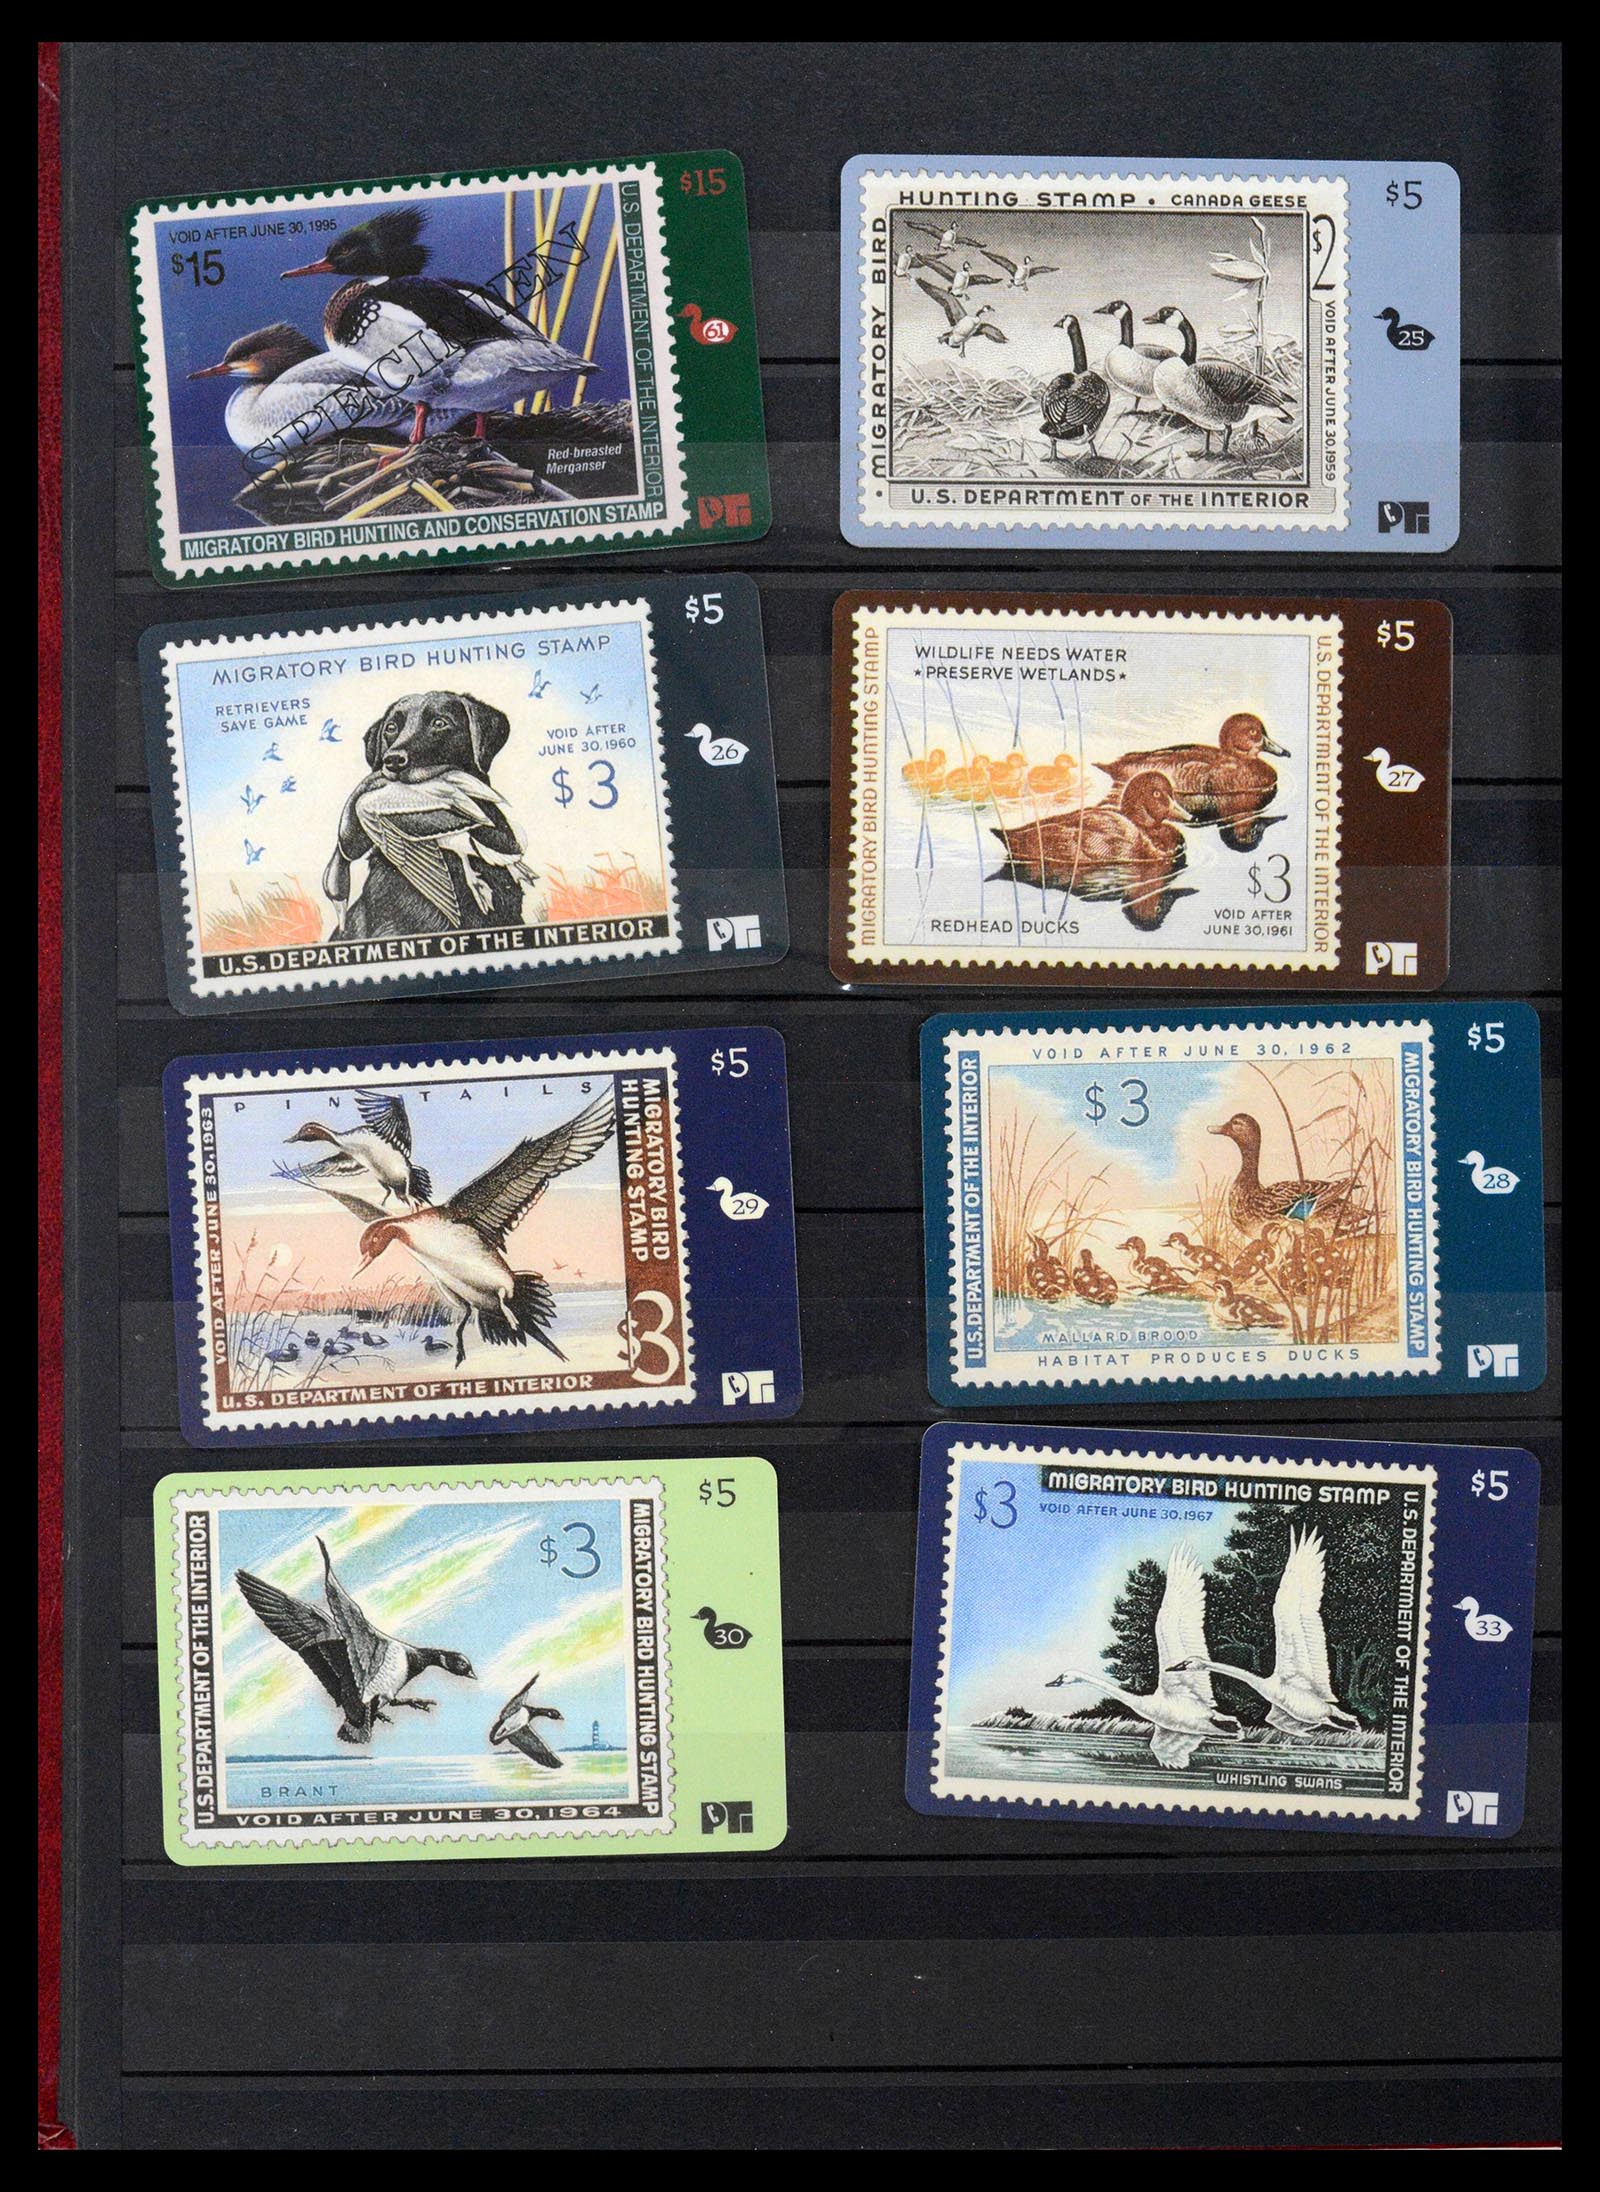 39426 0022 - Stamp collection 39426 USA duckstamps 1934-2007.